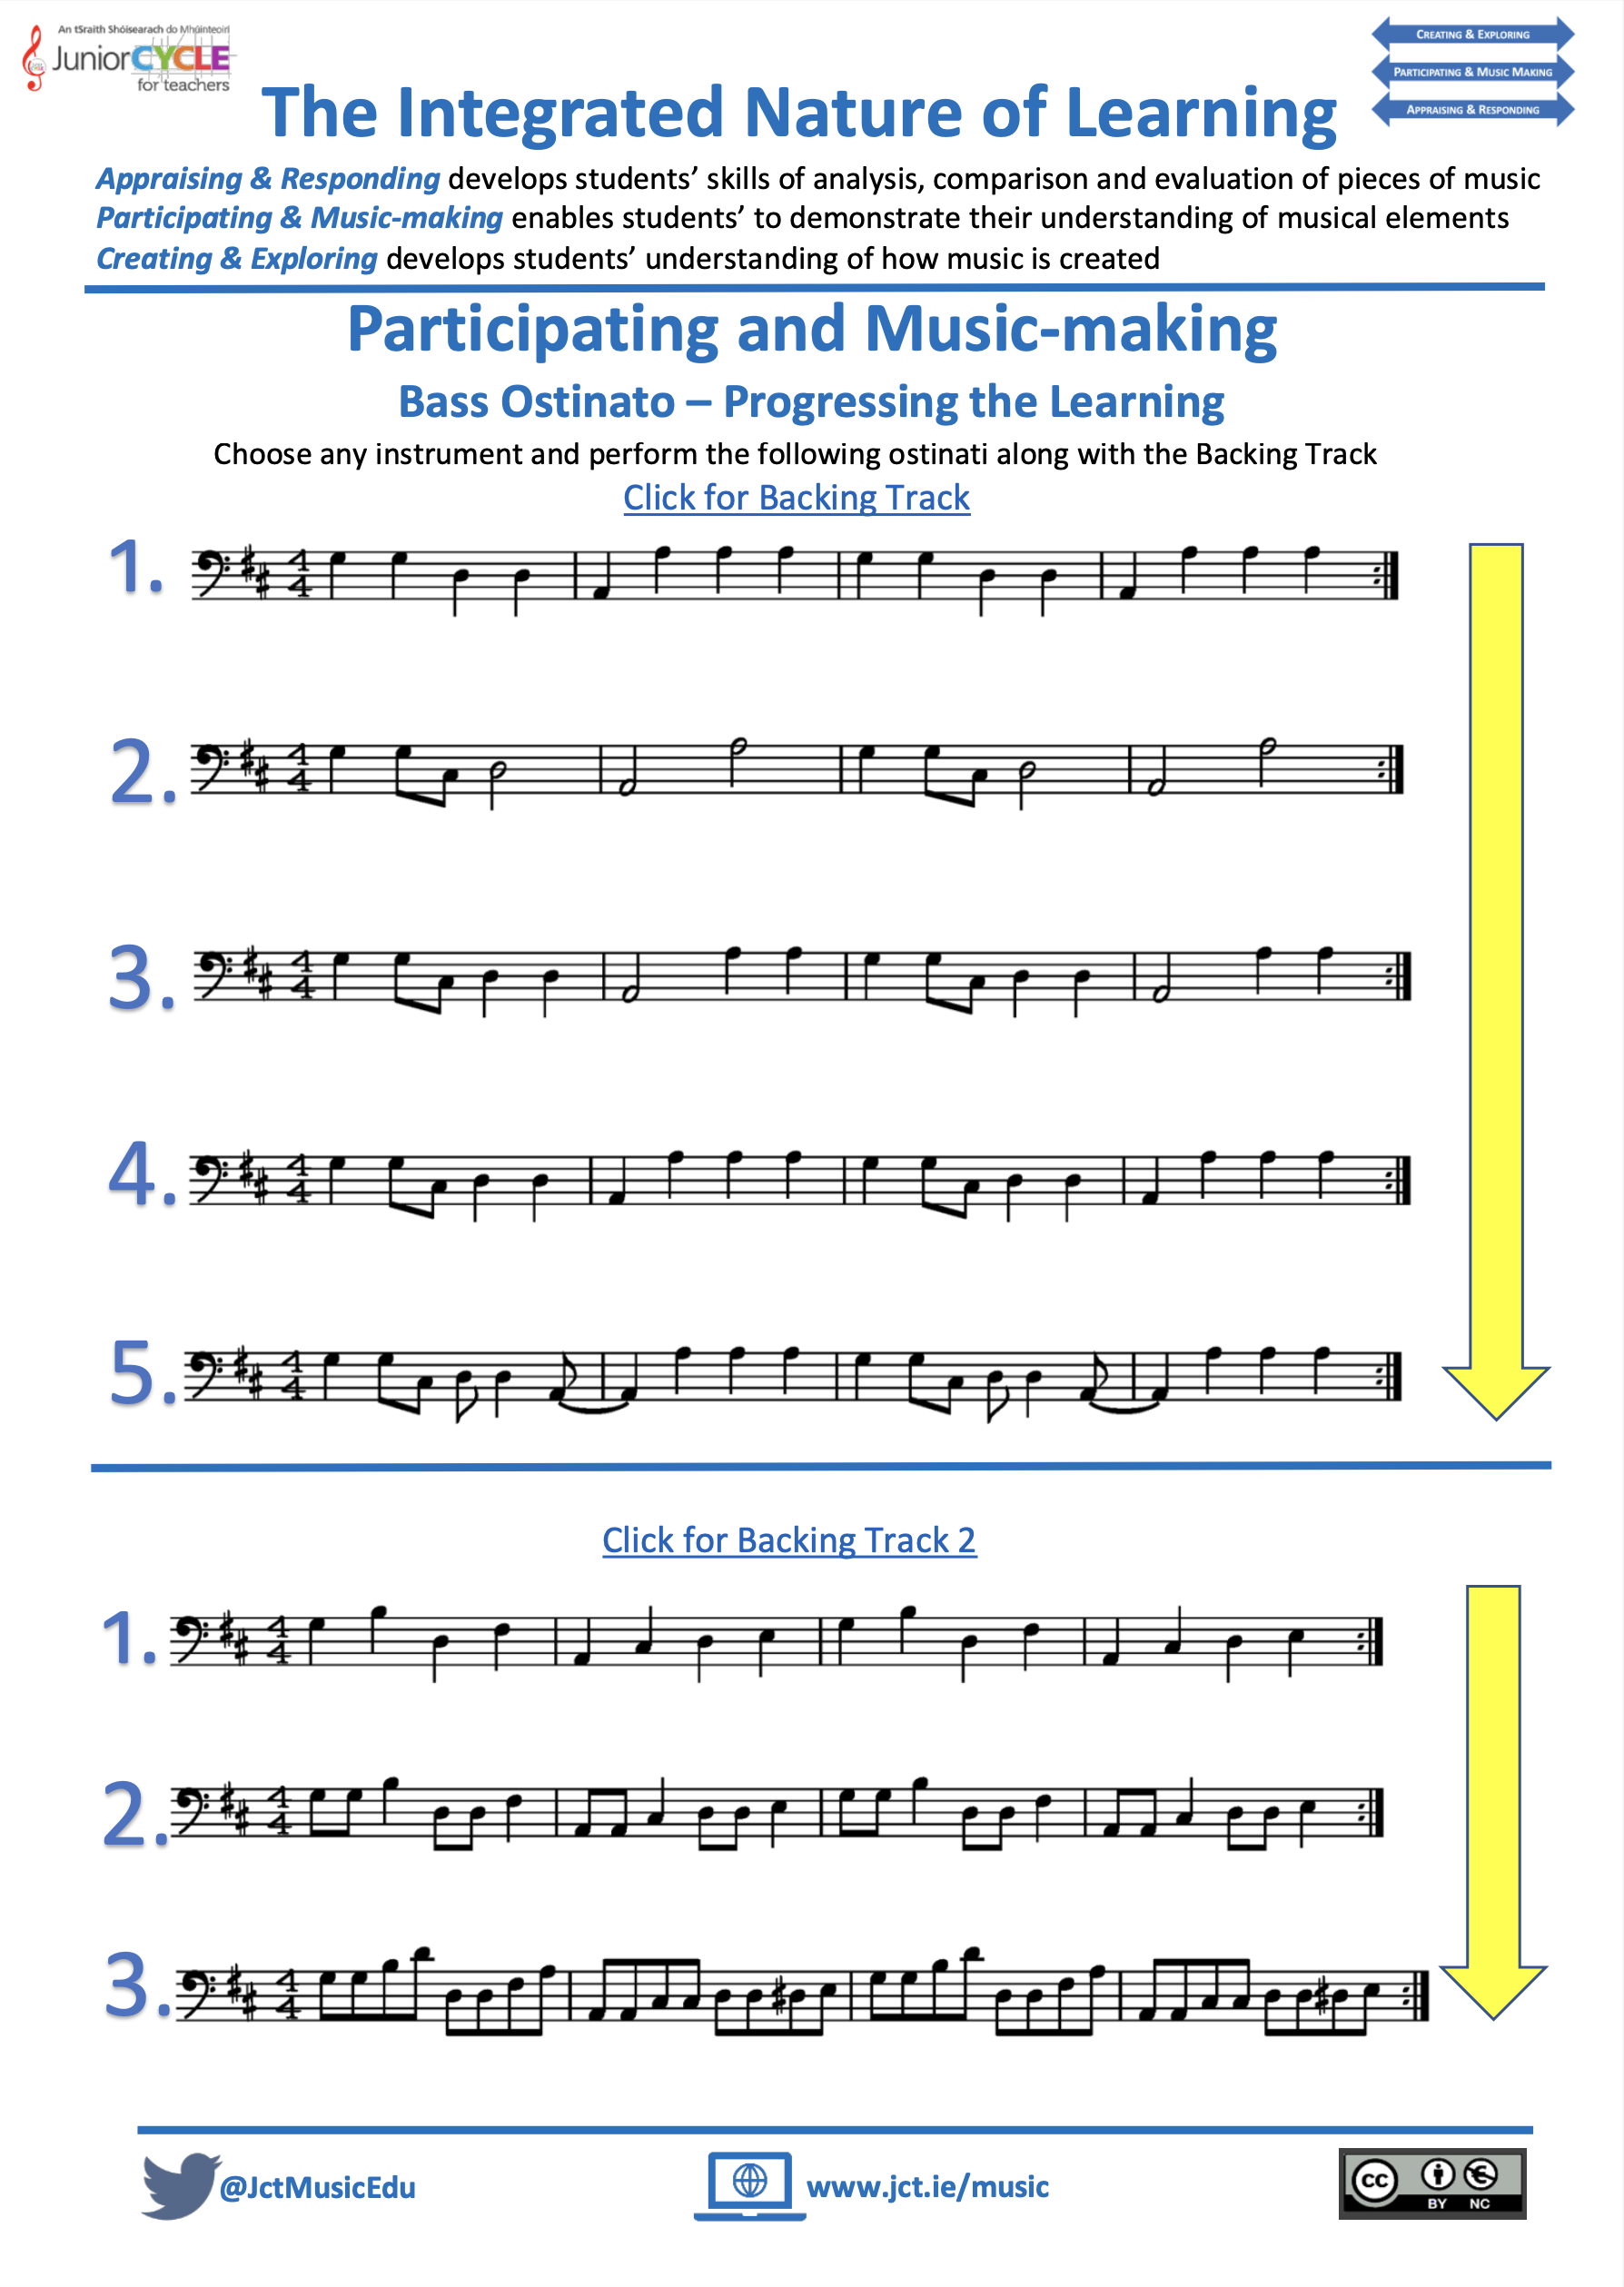 The Integrated Nature of Learning: Participating and Music-Making Bass Ostinato